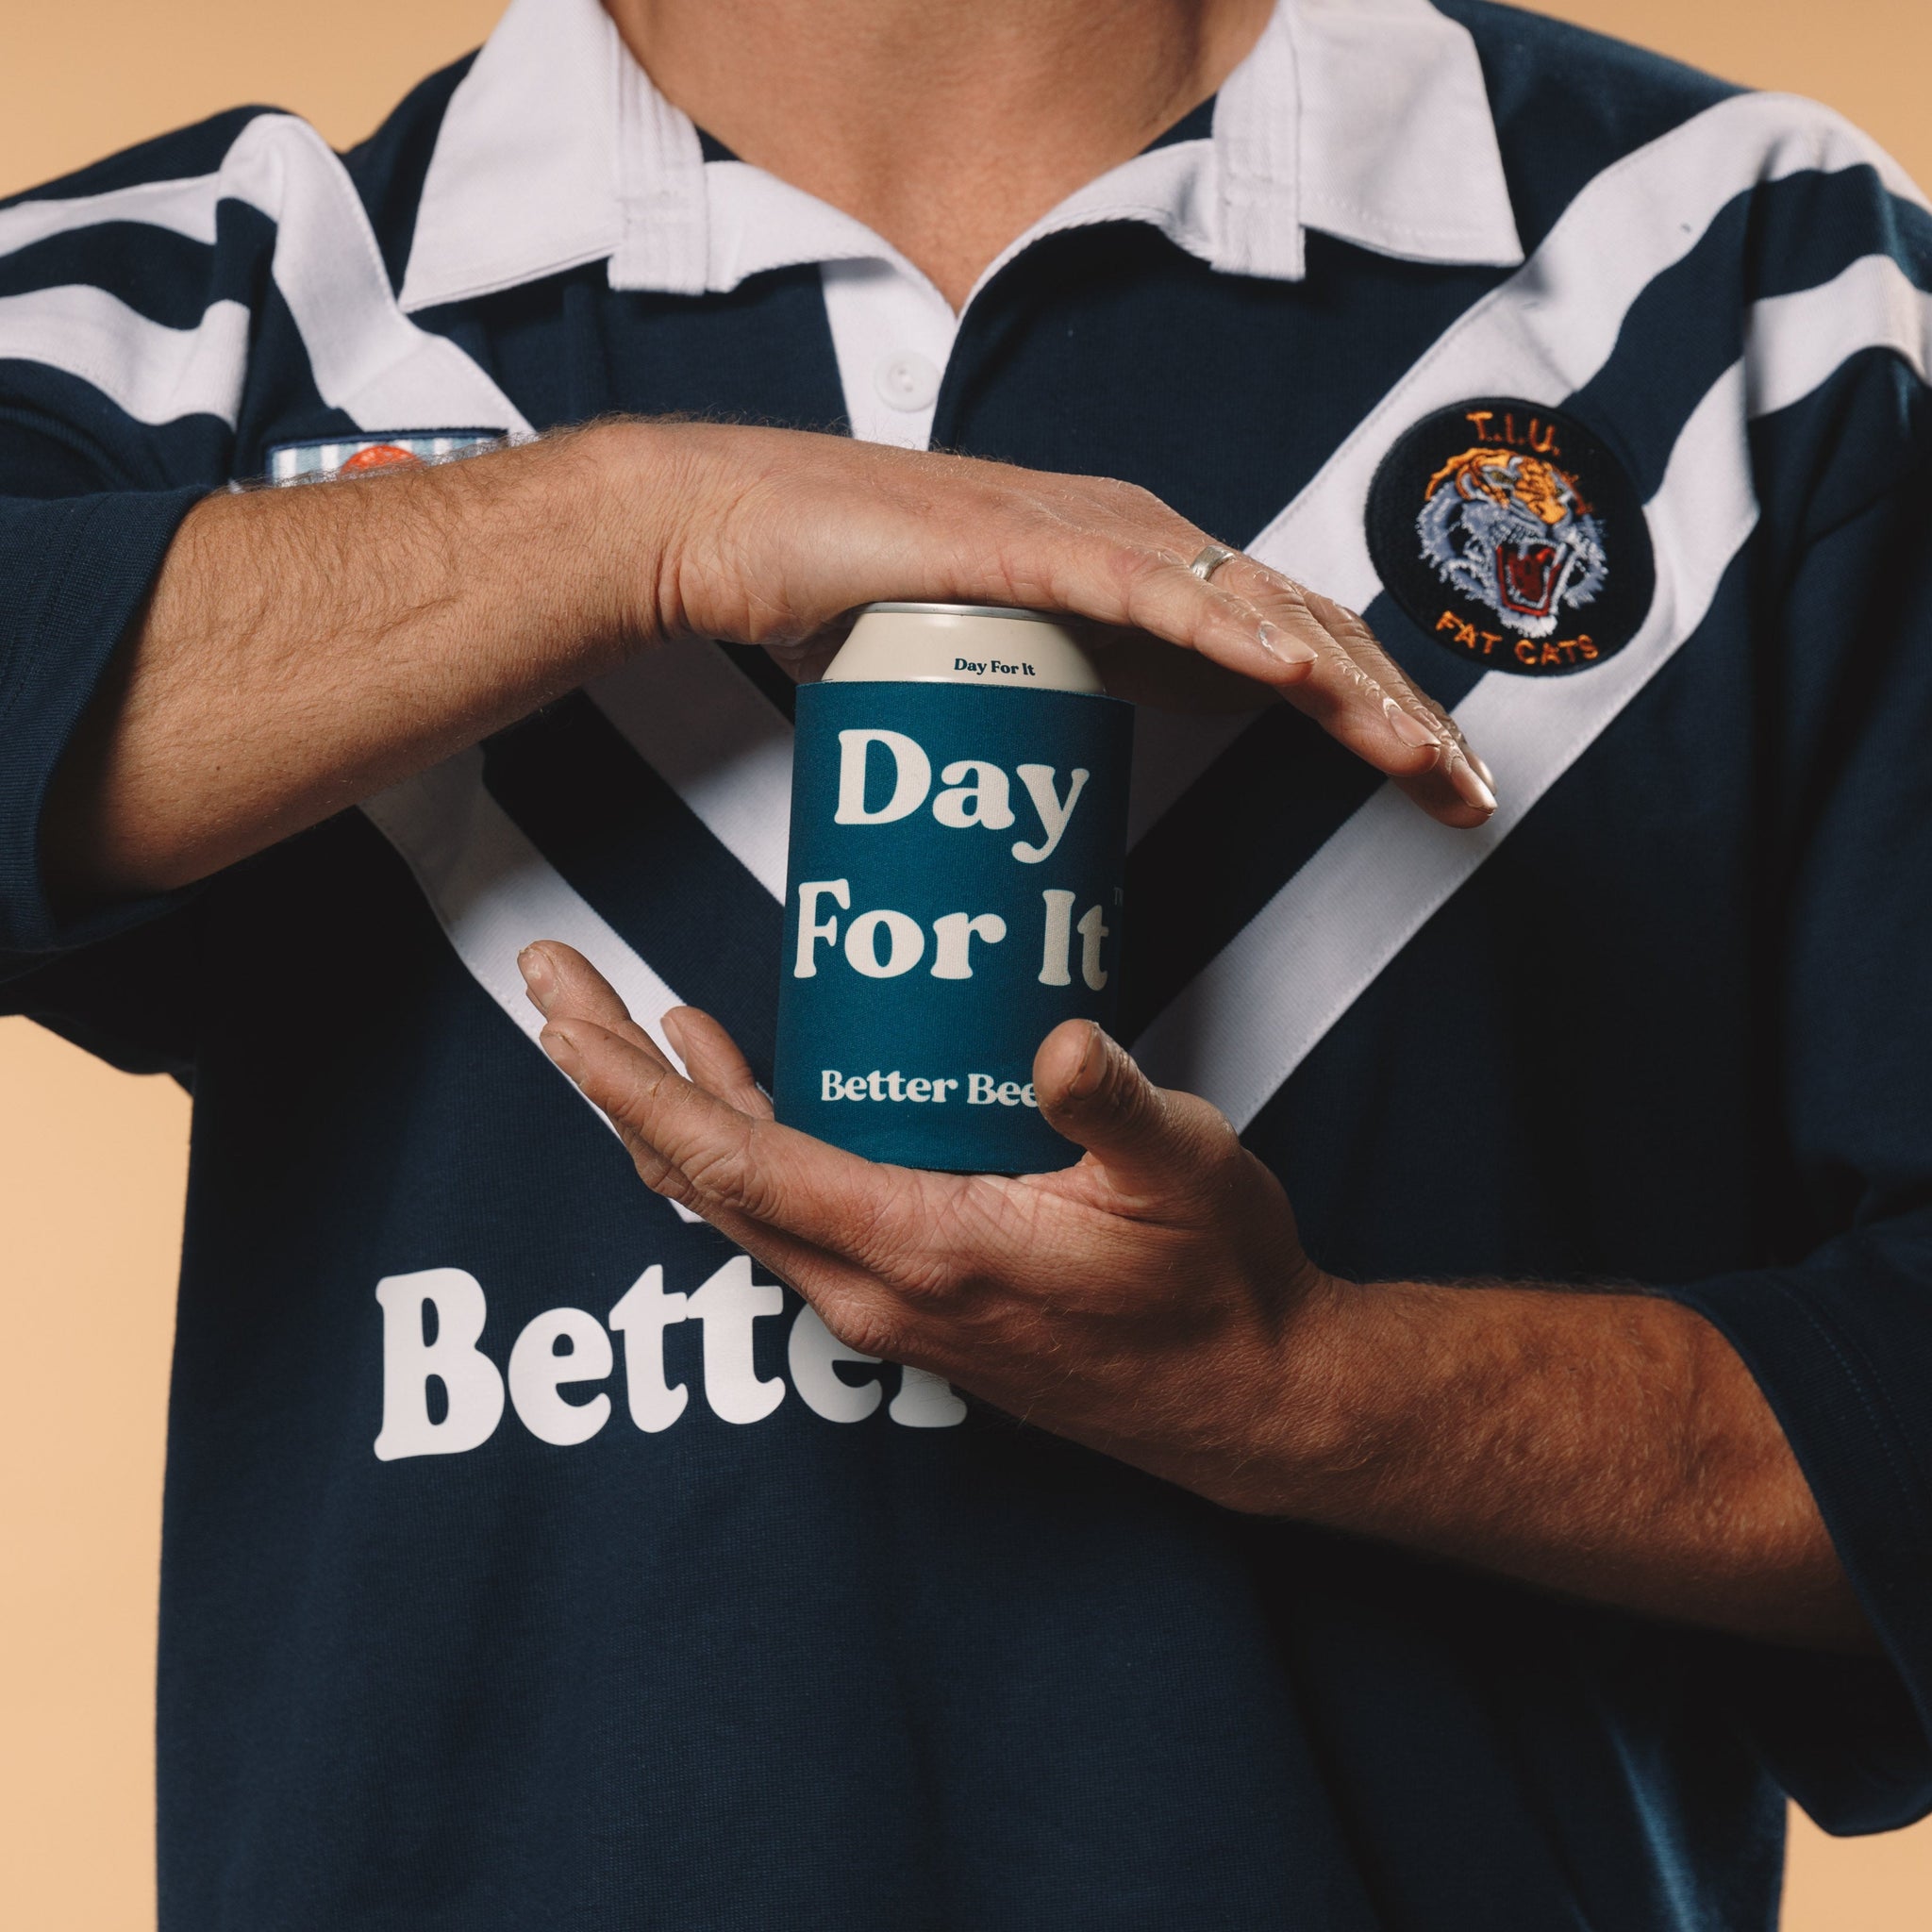 Day For It™ Blue Tinny Cooler with Better Beer logo features Navy Blue Rugby Jersey - Better Beer